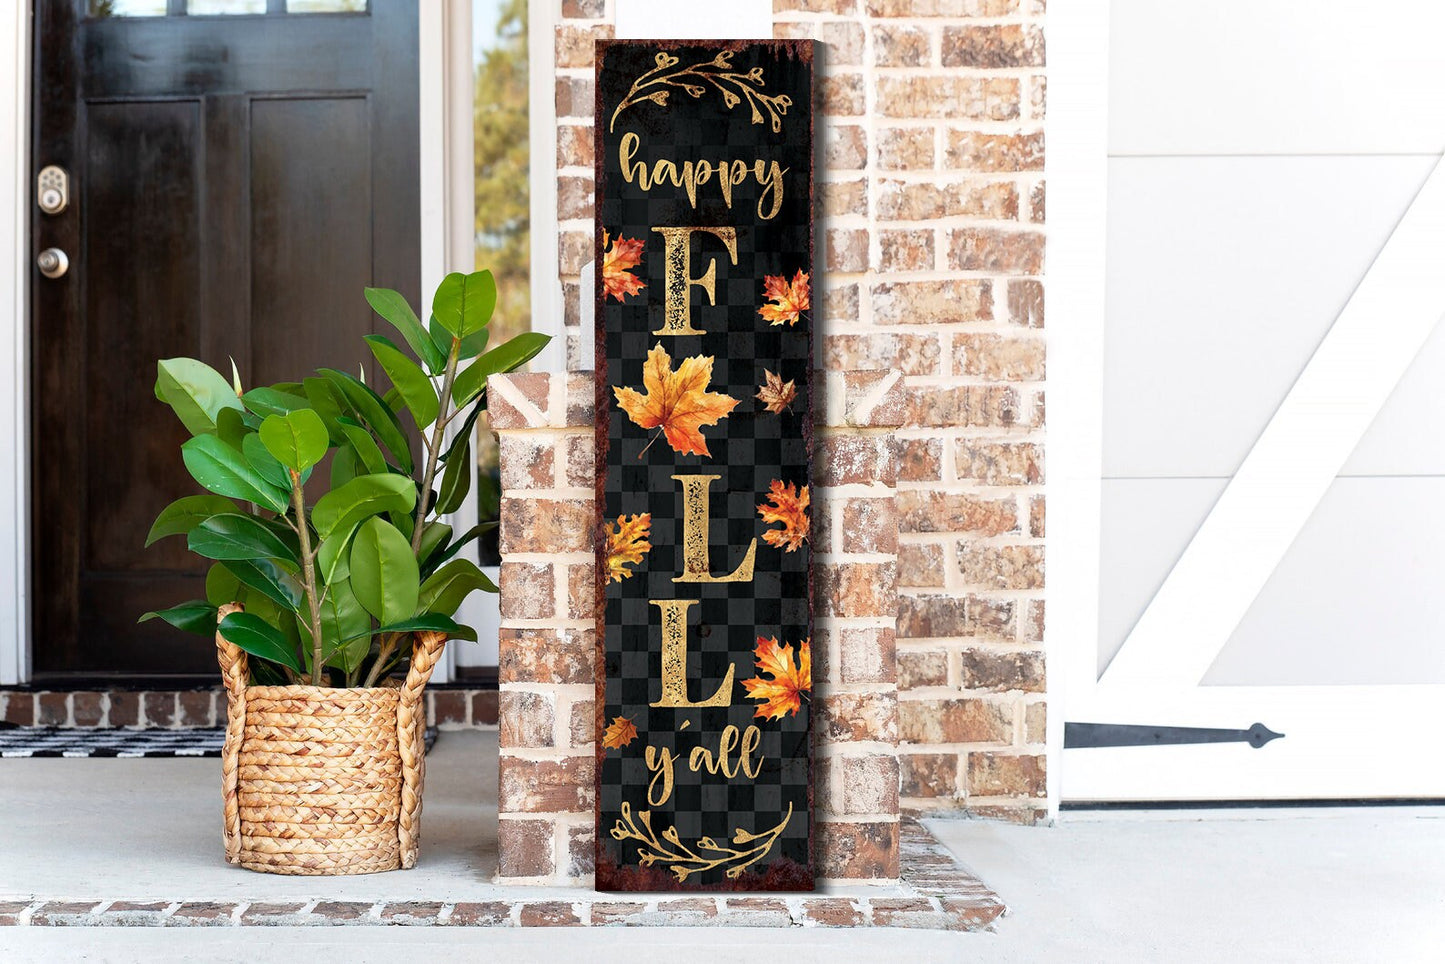 36in Happy Fall Y'all Porch Sign Decor Front Porch Fall Welcome Sign with Vintage Autumn Decoration, Modern Farmhouse Decor